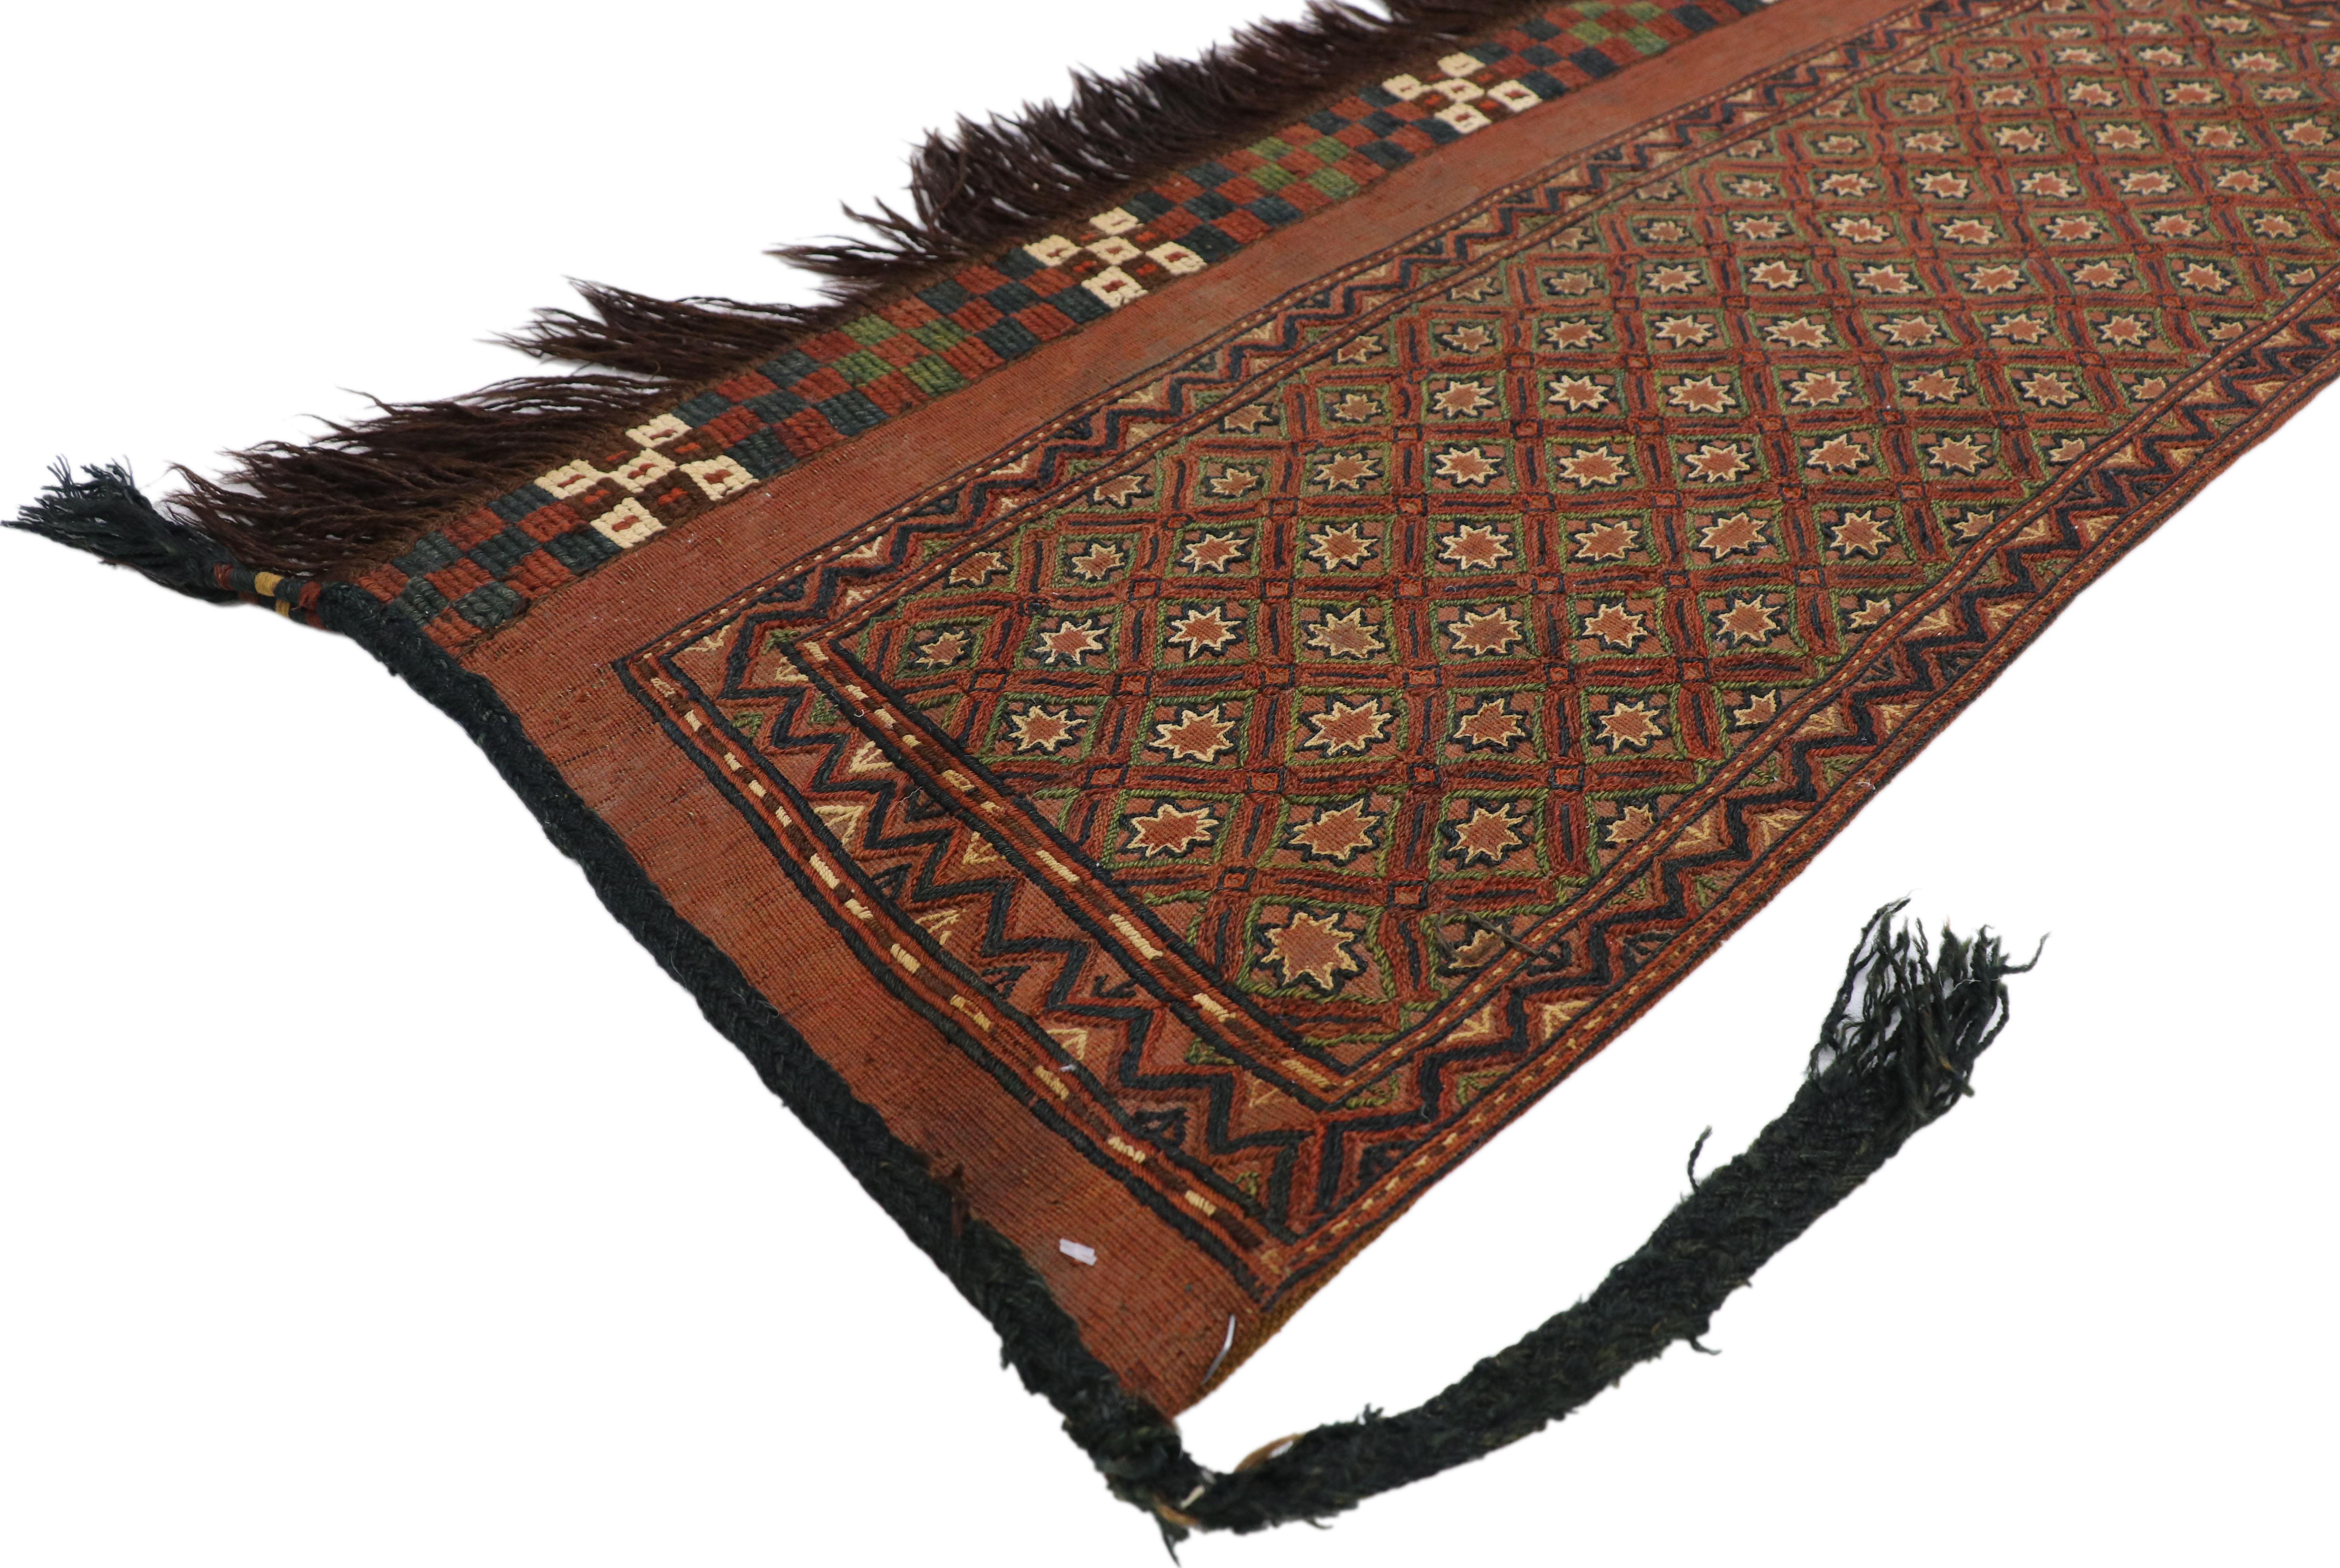 76637 Vintage Afghan Ersari Turkmen Torba, wall hanging, tapestry. This hand knotted wool antique Afghan Turkmen Turkoman Torba storage bag features an all-over symmetrical geometric pattern of Gul motifs, possibly Tekke, Ersari or Yomut. Large